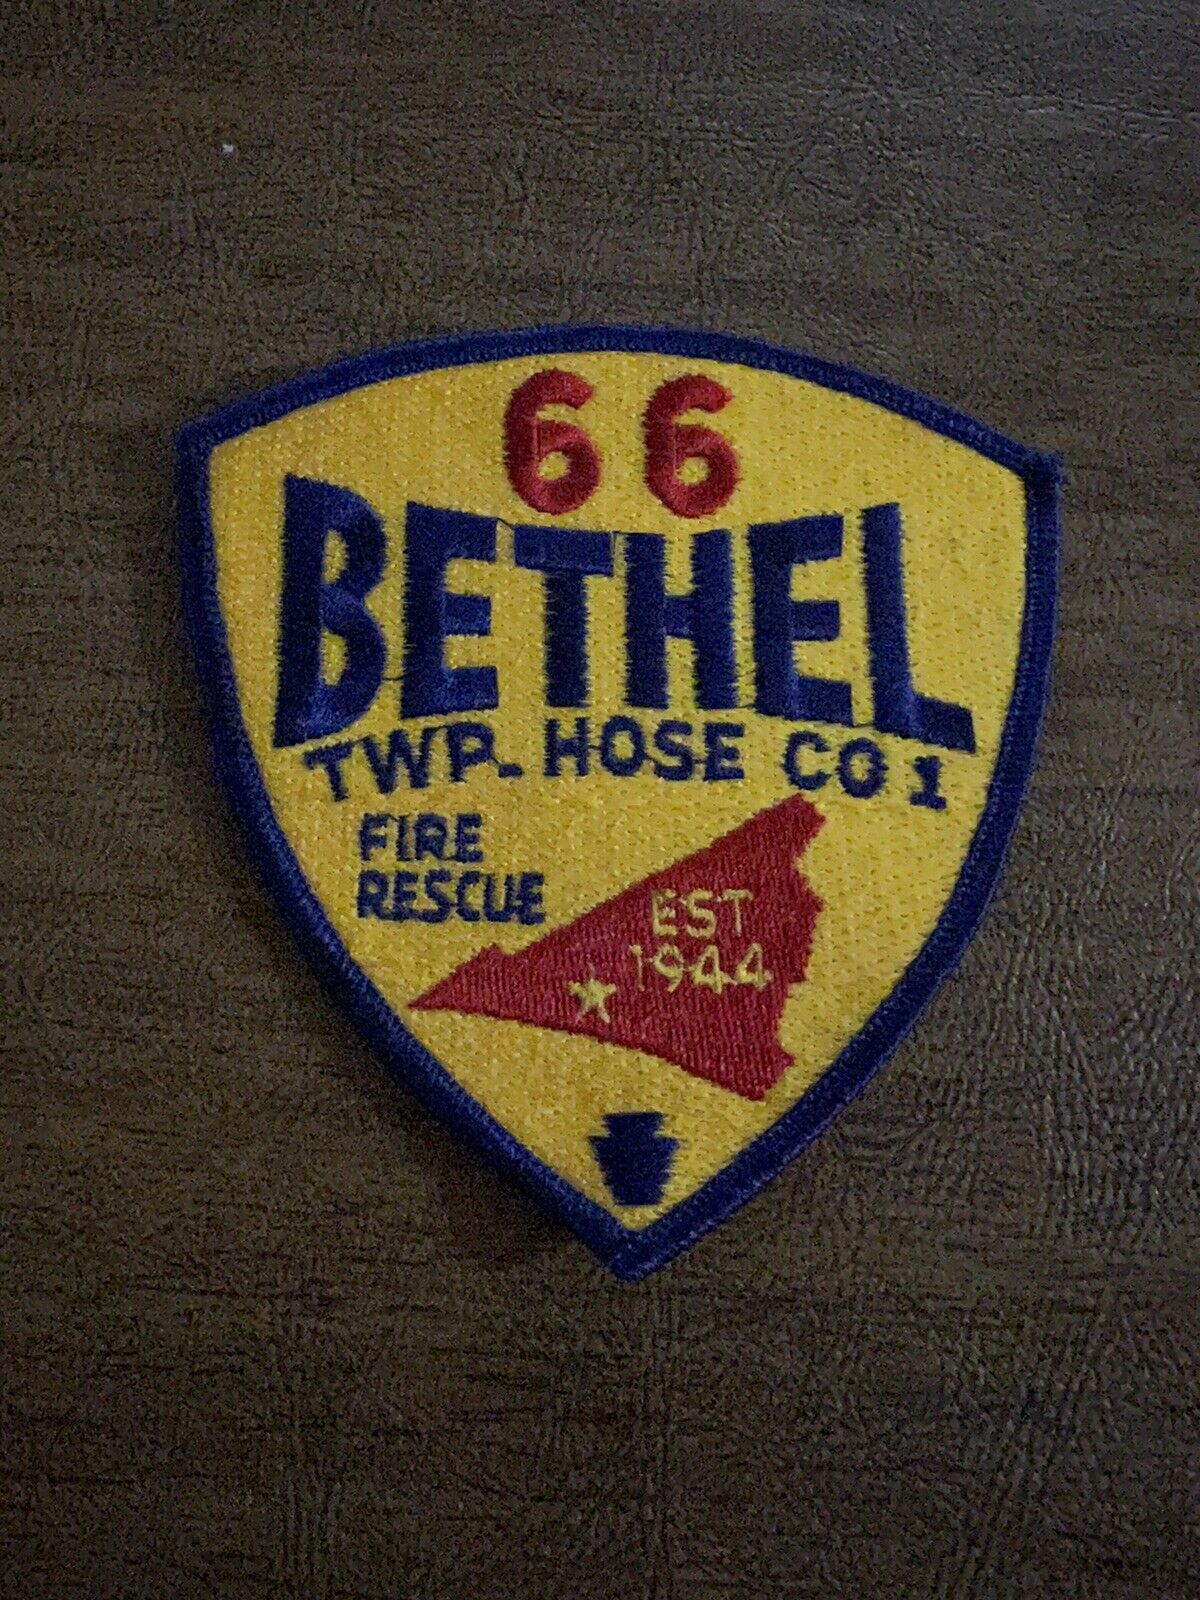 Bethel 66 TWP HOSE CO1. Fire and Rescue Est 1944  Patch. Yellow, Blue And Red.